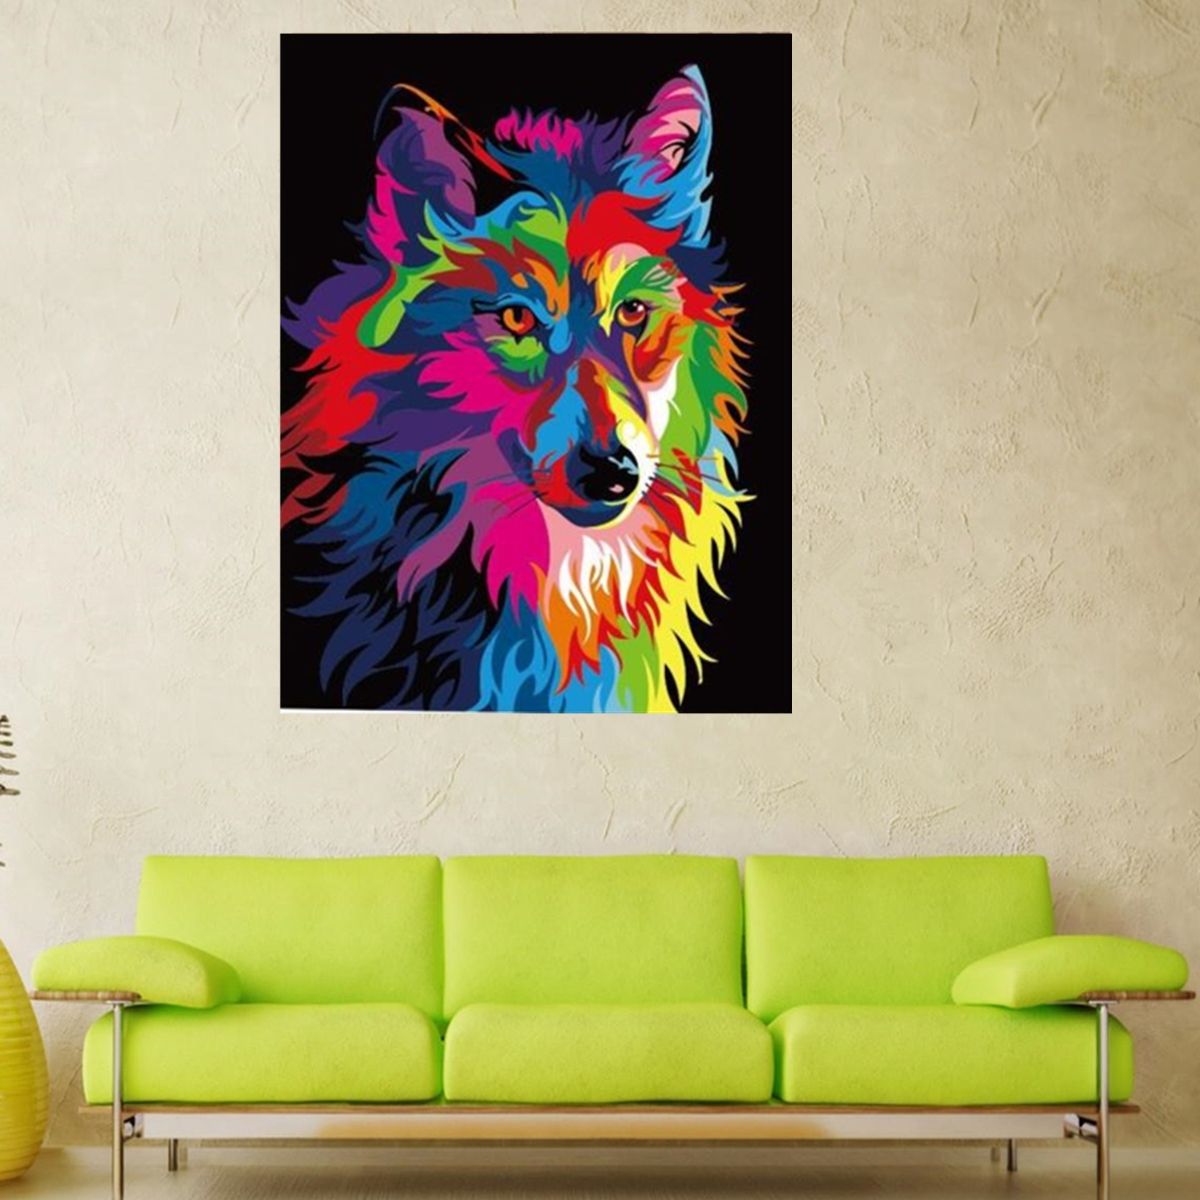 Wooden Framed Paintnumber Kit Multi Colored Wolf Cat With Current Pop Art Wood Wall Art (View 19 of 20)